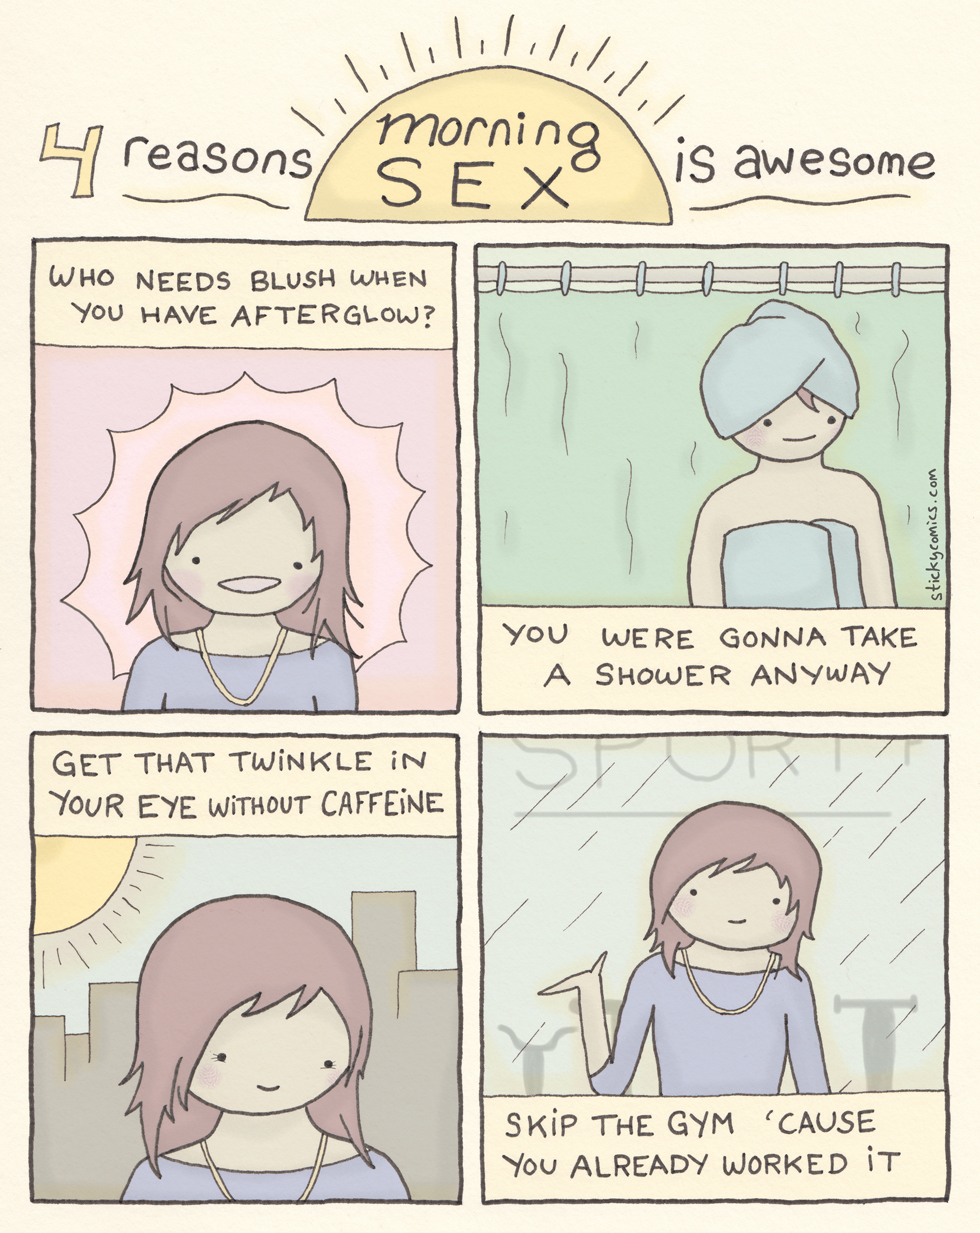 morning sex is awesome